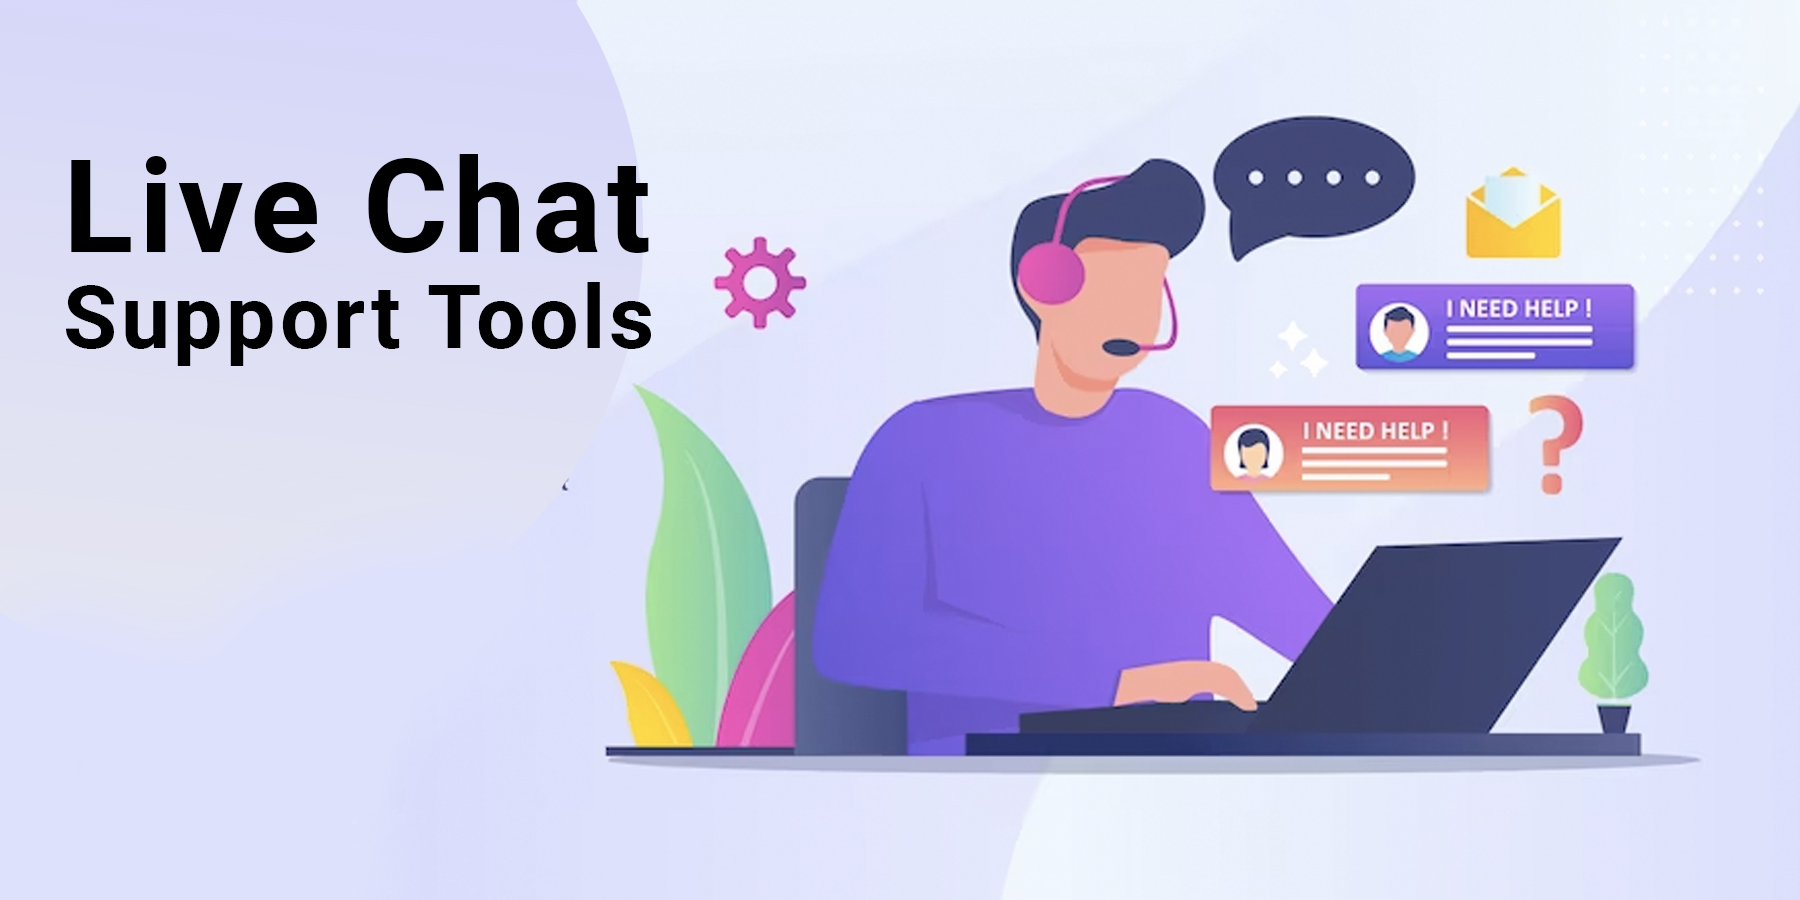 Live Chat Support Tools